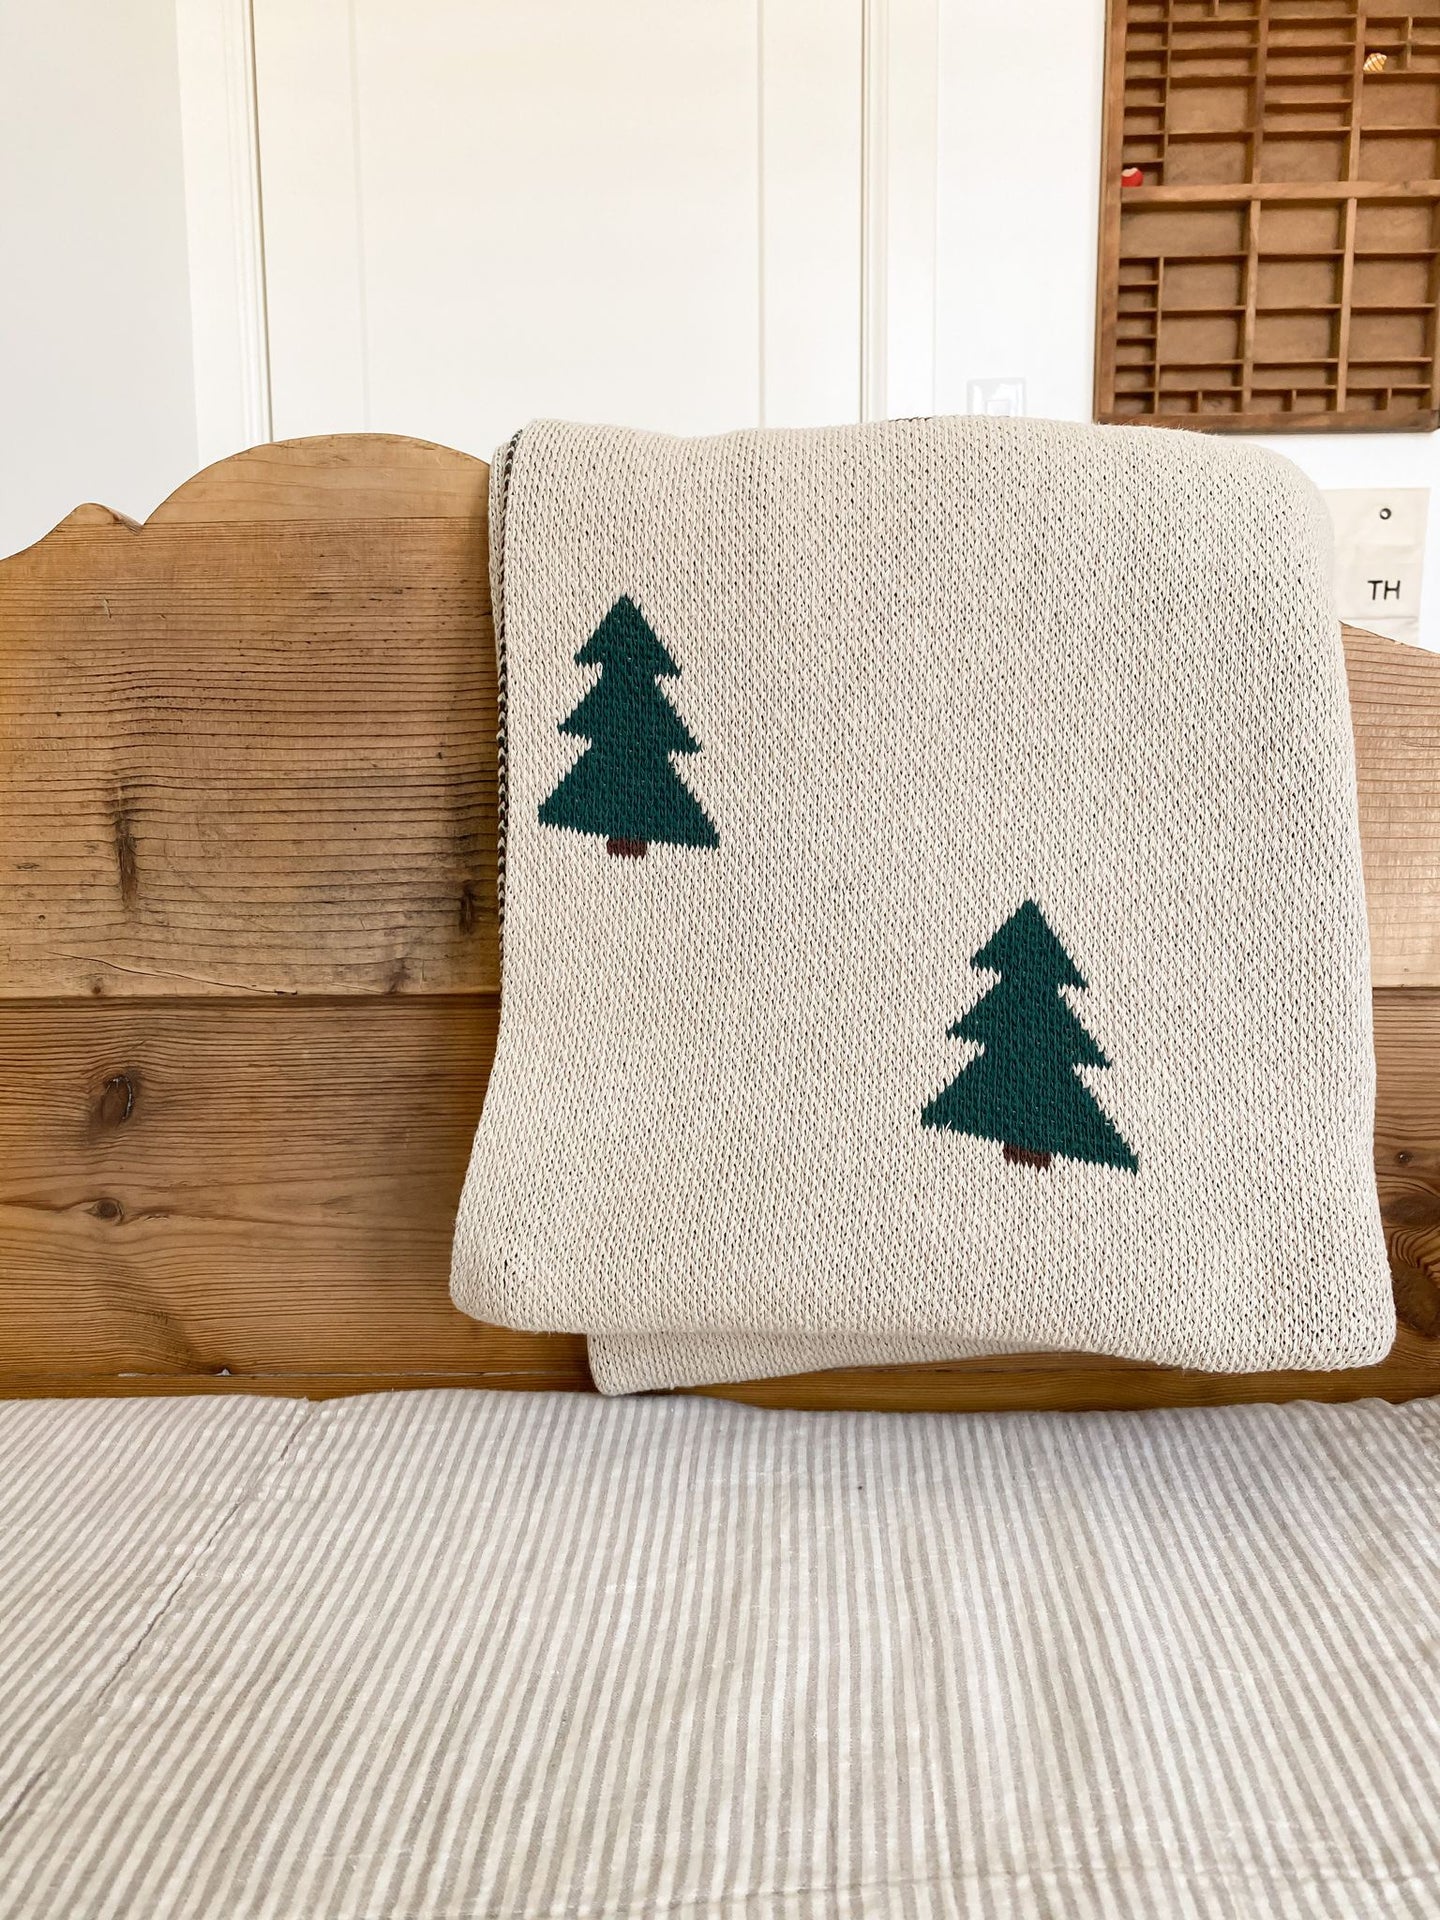 Knit Pine Tree Blanket - Throw 50 x 60in